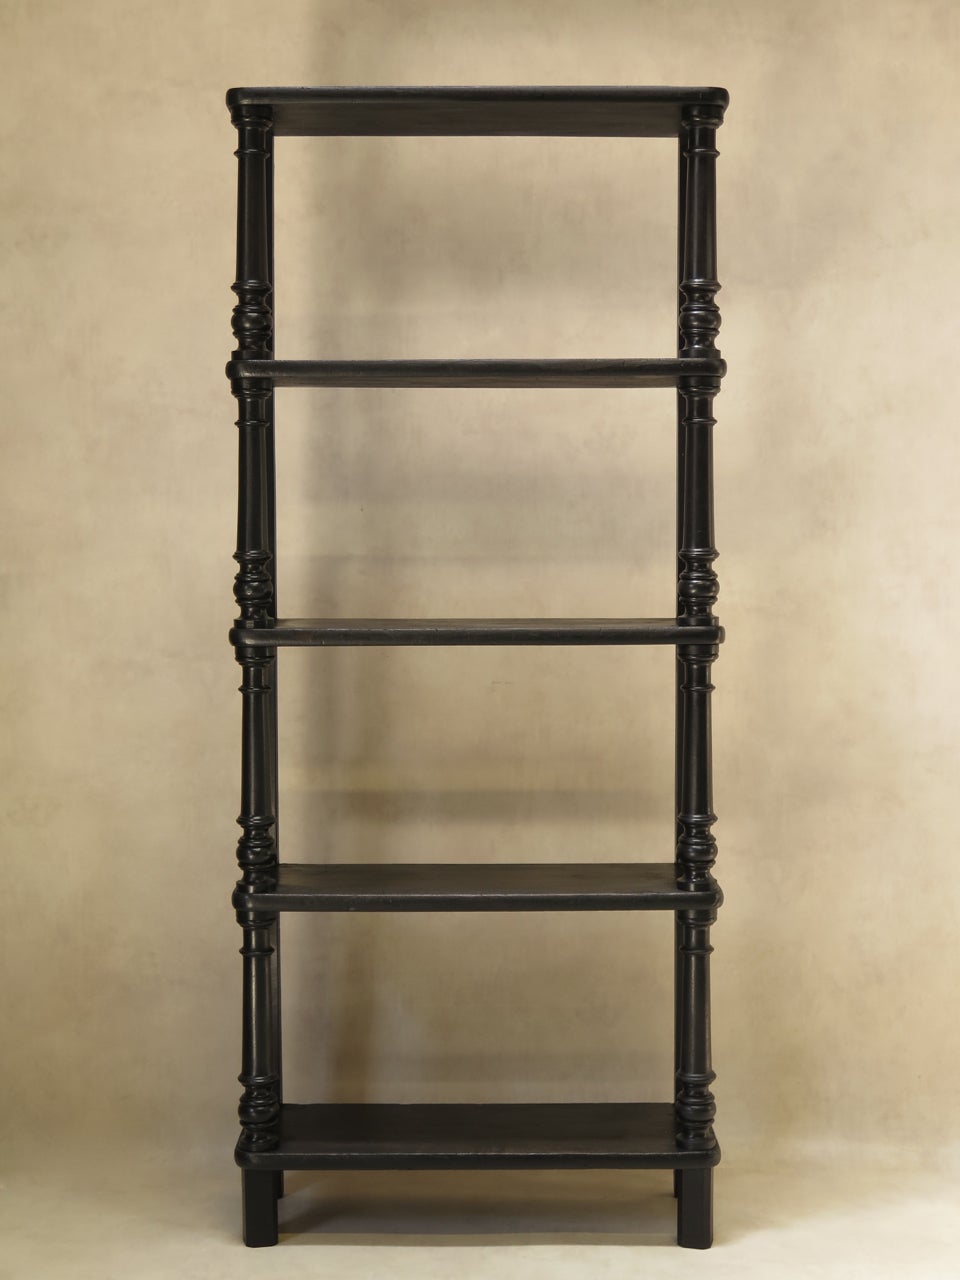 Elegant slender Napoleon III shelves in ebonized wood, with turned baluster front uprights, and rounded shelves. A nice classic piece.